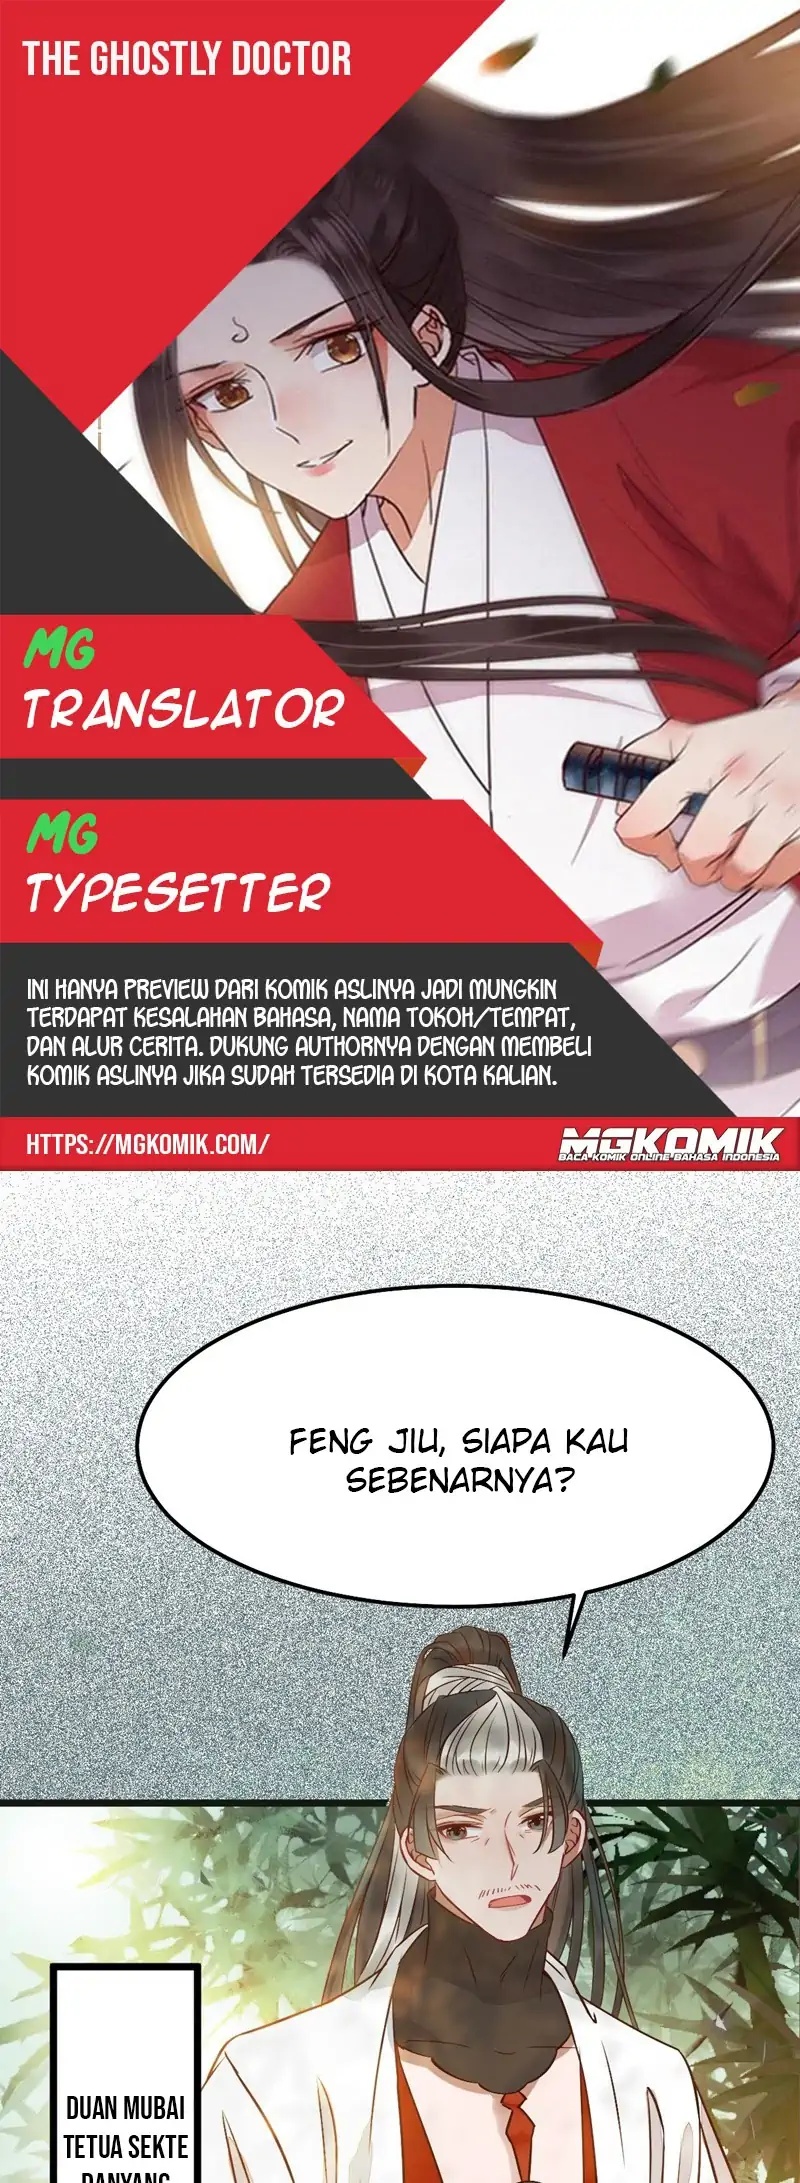 The Ghostly Doctor Chapter 470